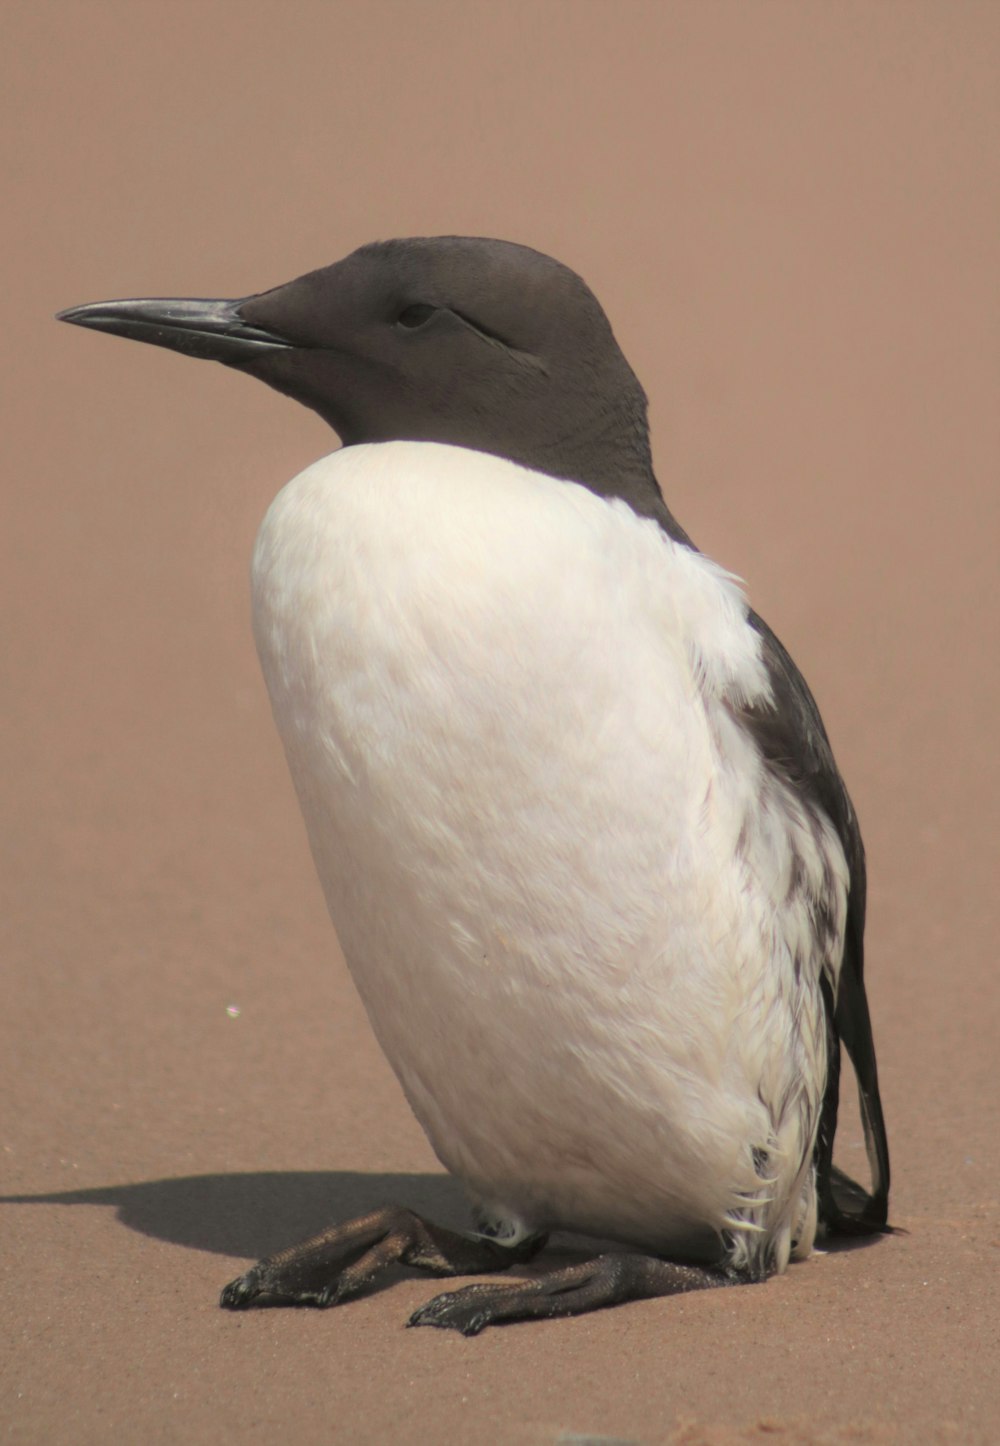 a black and white bird sitting on the sand